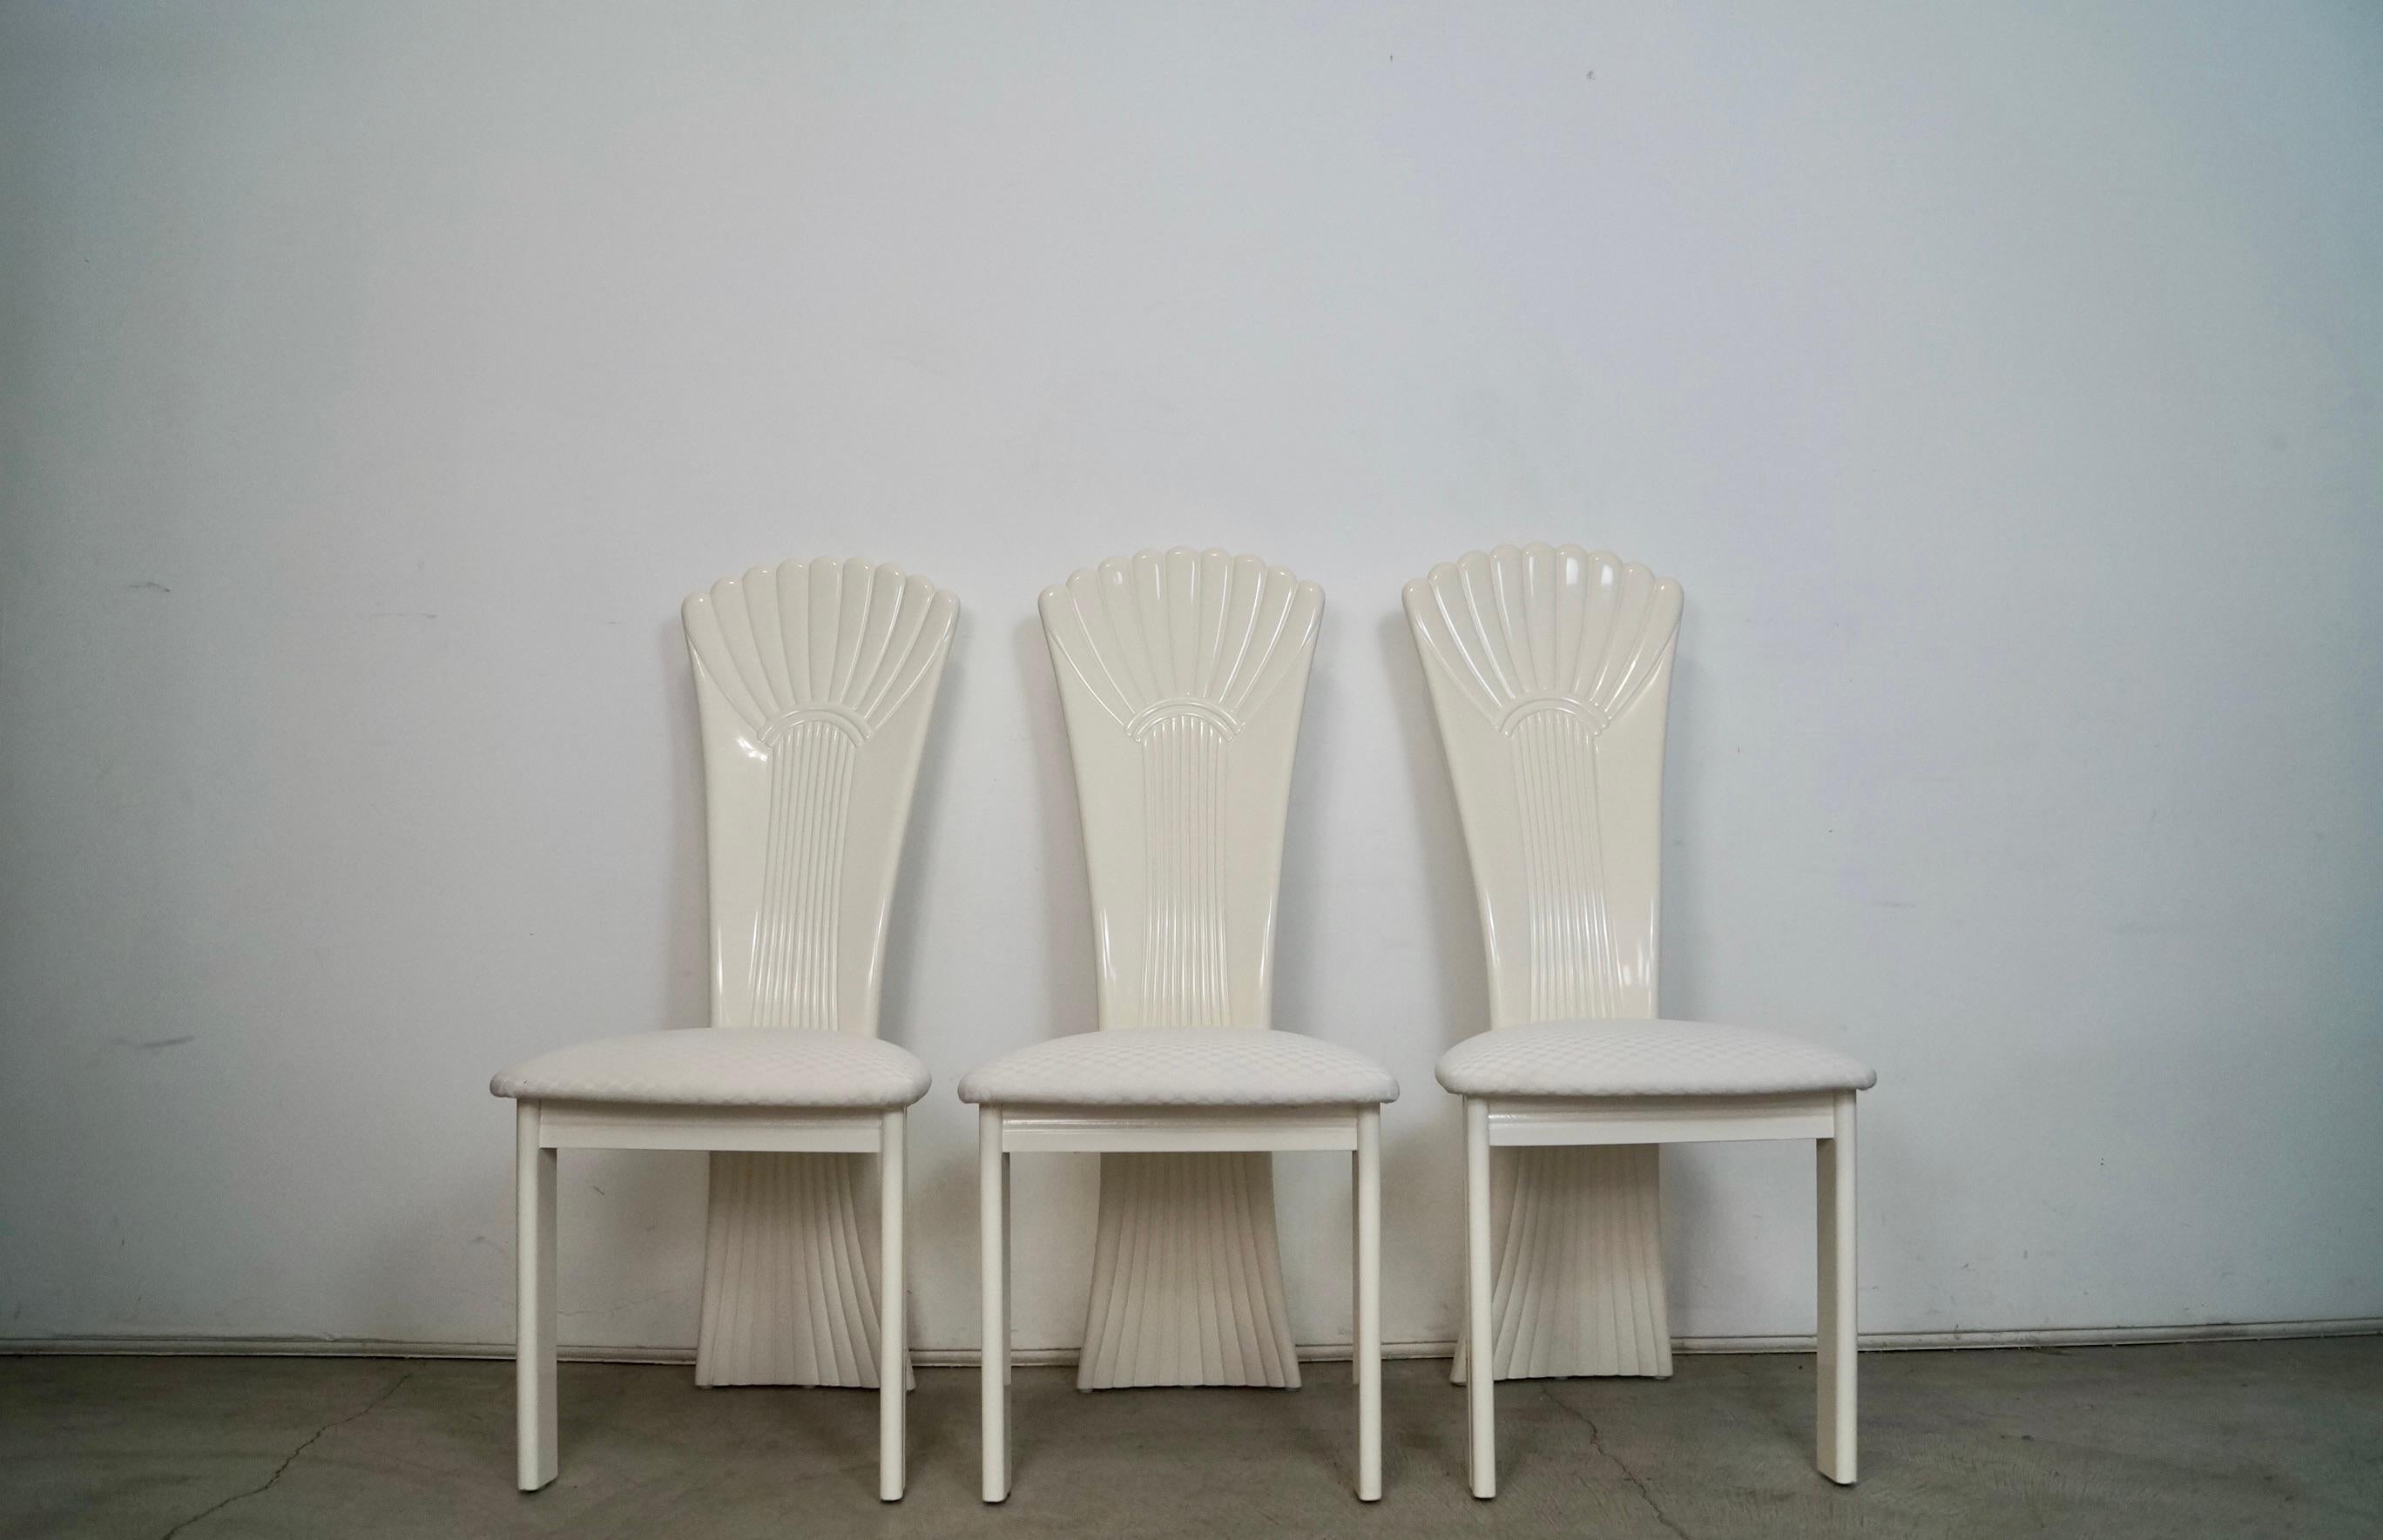 Set of 3 Hollywood Regency dining chairs for sale. Vintage post modern chairs that were manufactured in the 1980's, and made in Italy and sold by Najarian Furniture. Very high-quality chairs that are solid wood lacquered in white. The lacquer is in